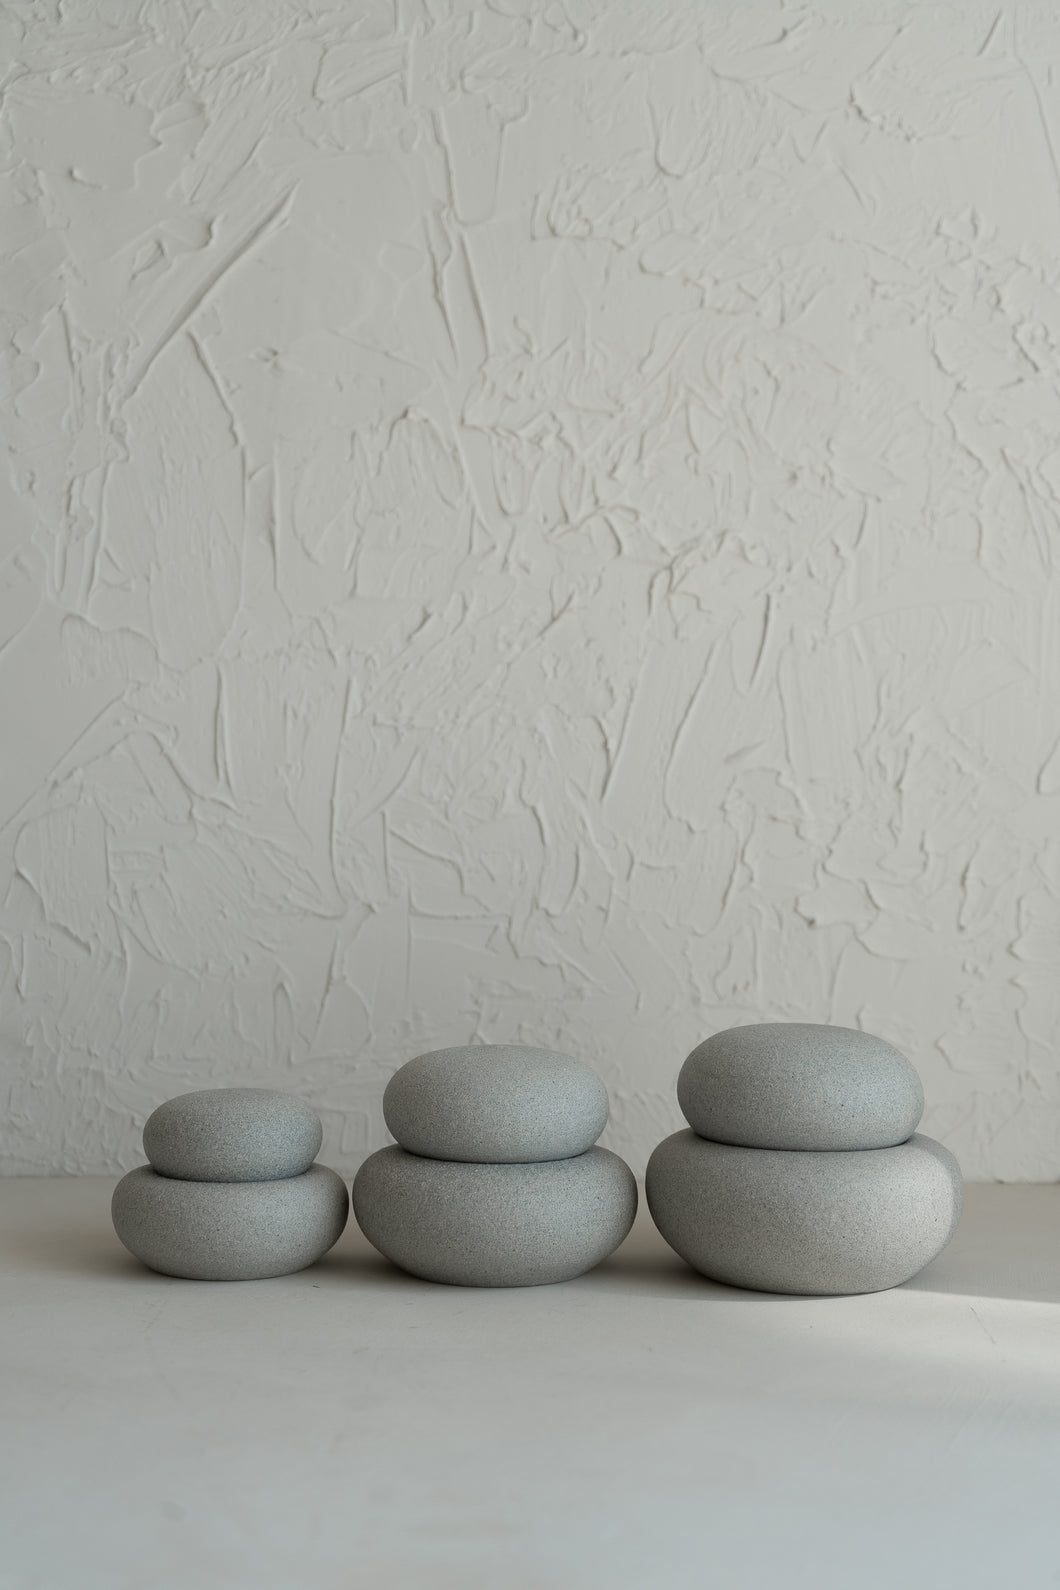 Grey Wish Stone Vanity Handmade Ceramic Container With Lid Home Decor Luxury Accents Made By Eunjin for INK + PORCELAIN